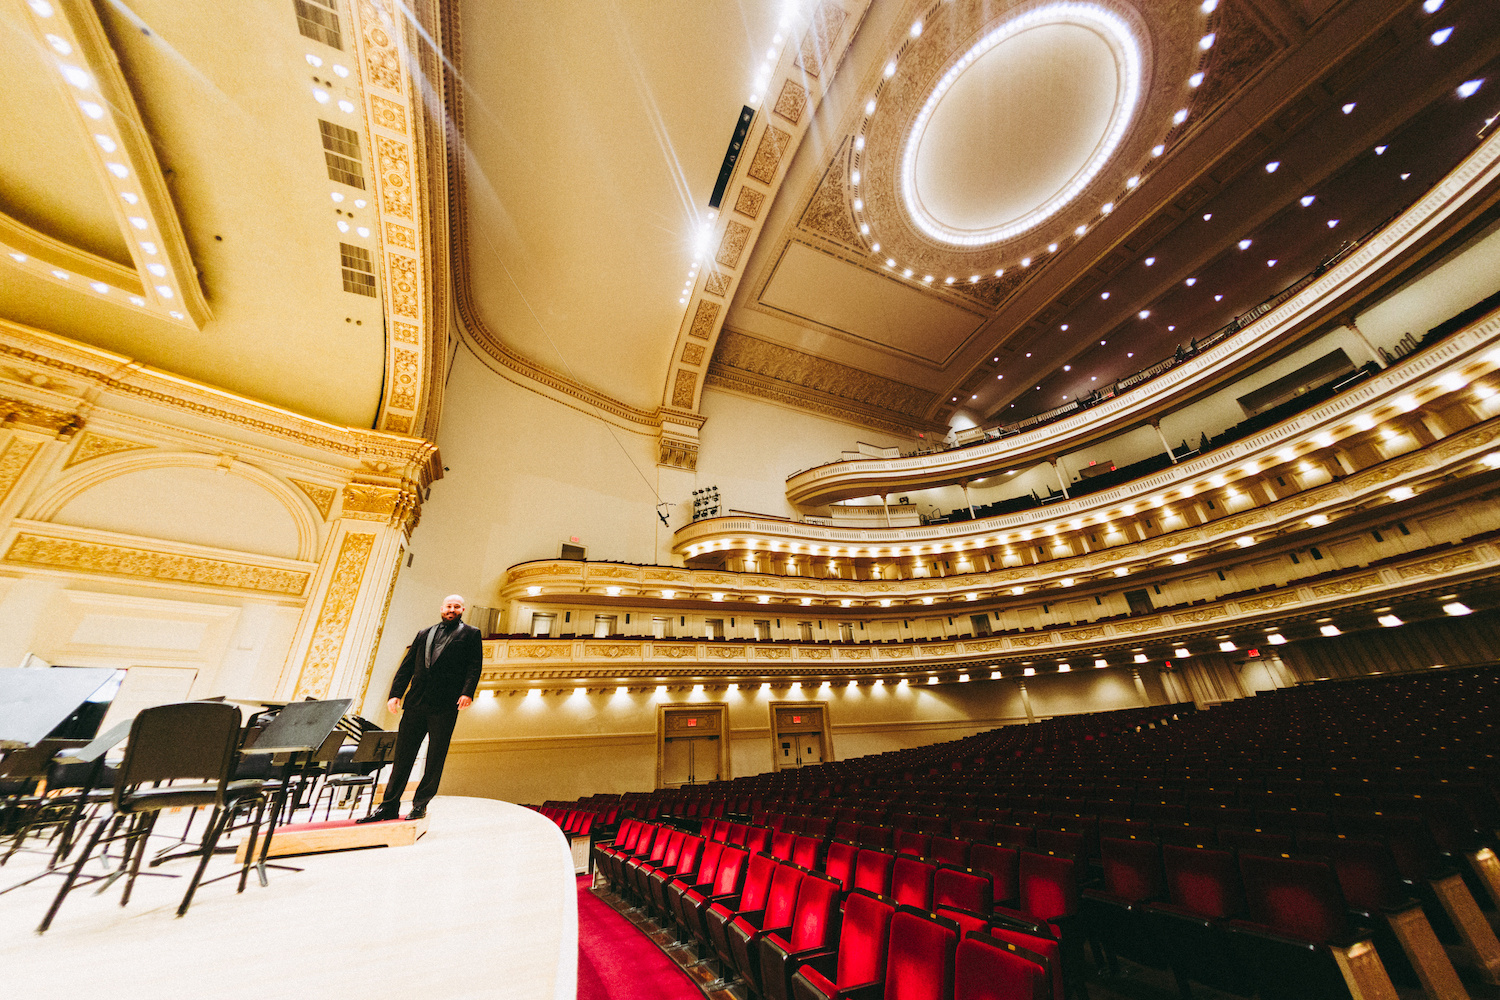 WE.LSU.CARNEGIE.GioOnstage – The La Sierra University Wind Ensemble Director Giovanni Santos pauses for a photo on the Isaac Stern Auditorium/Ronald O. Perelman Stage at Carnegie Hall.